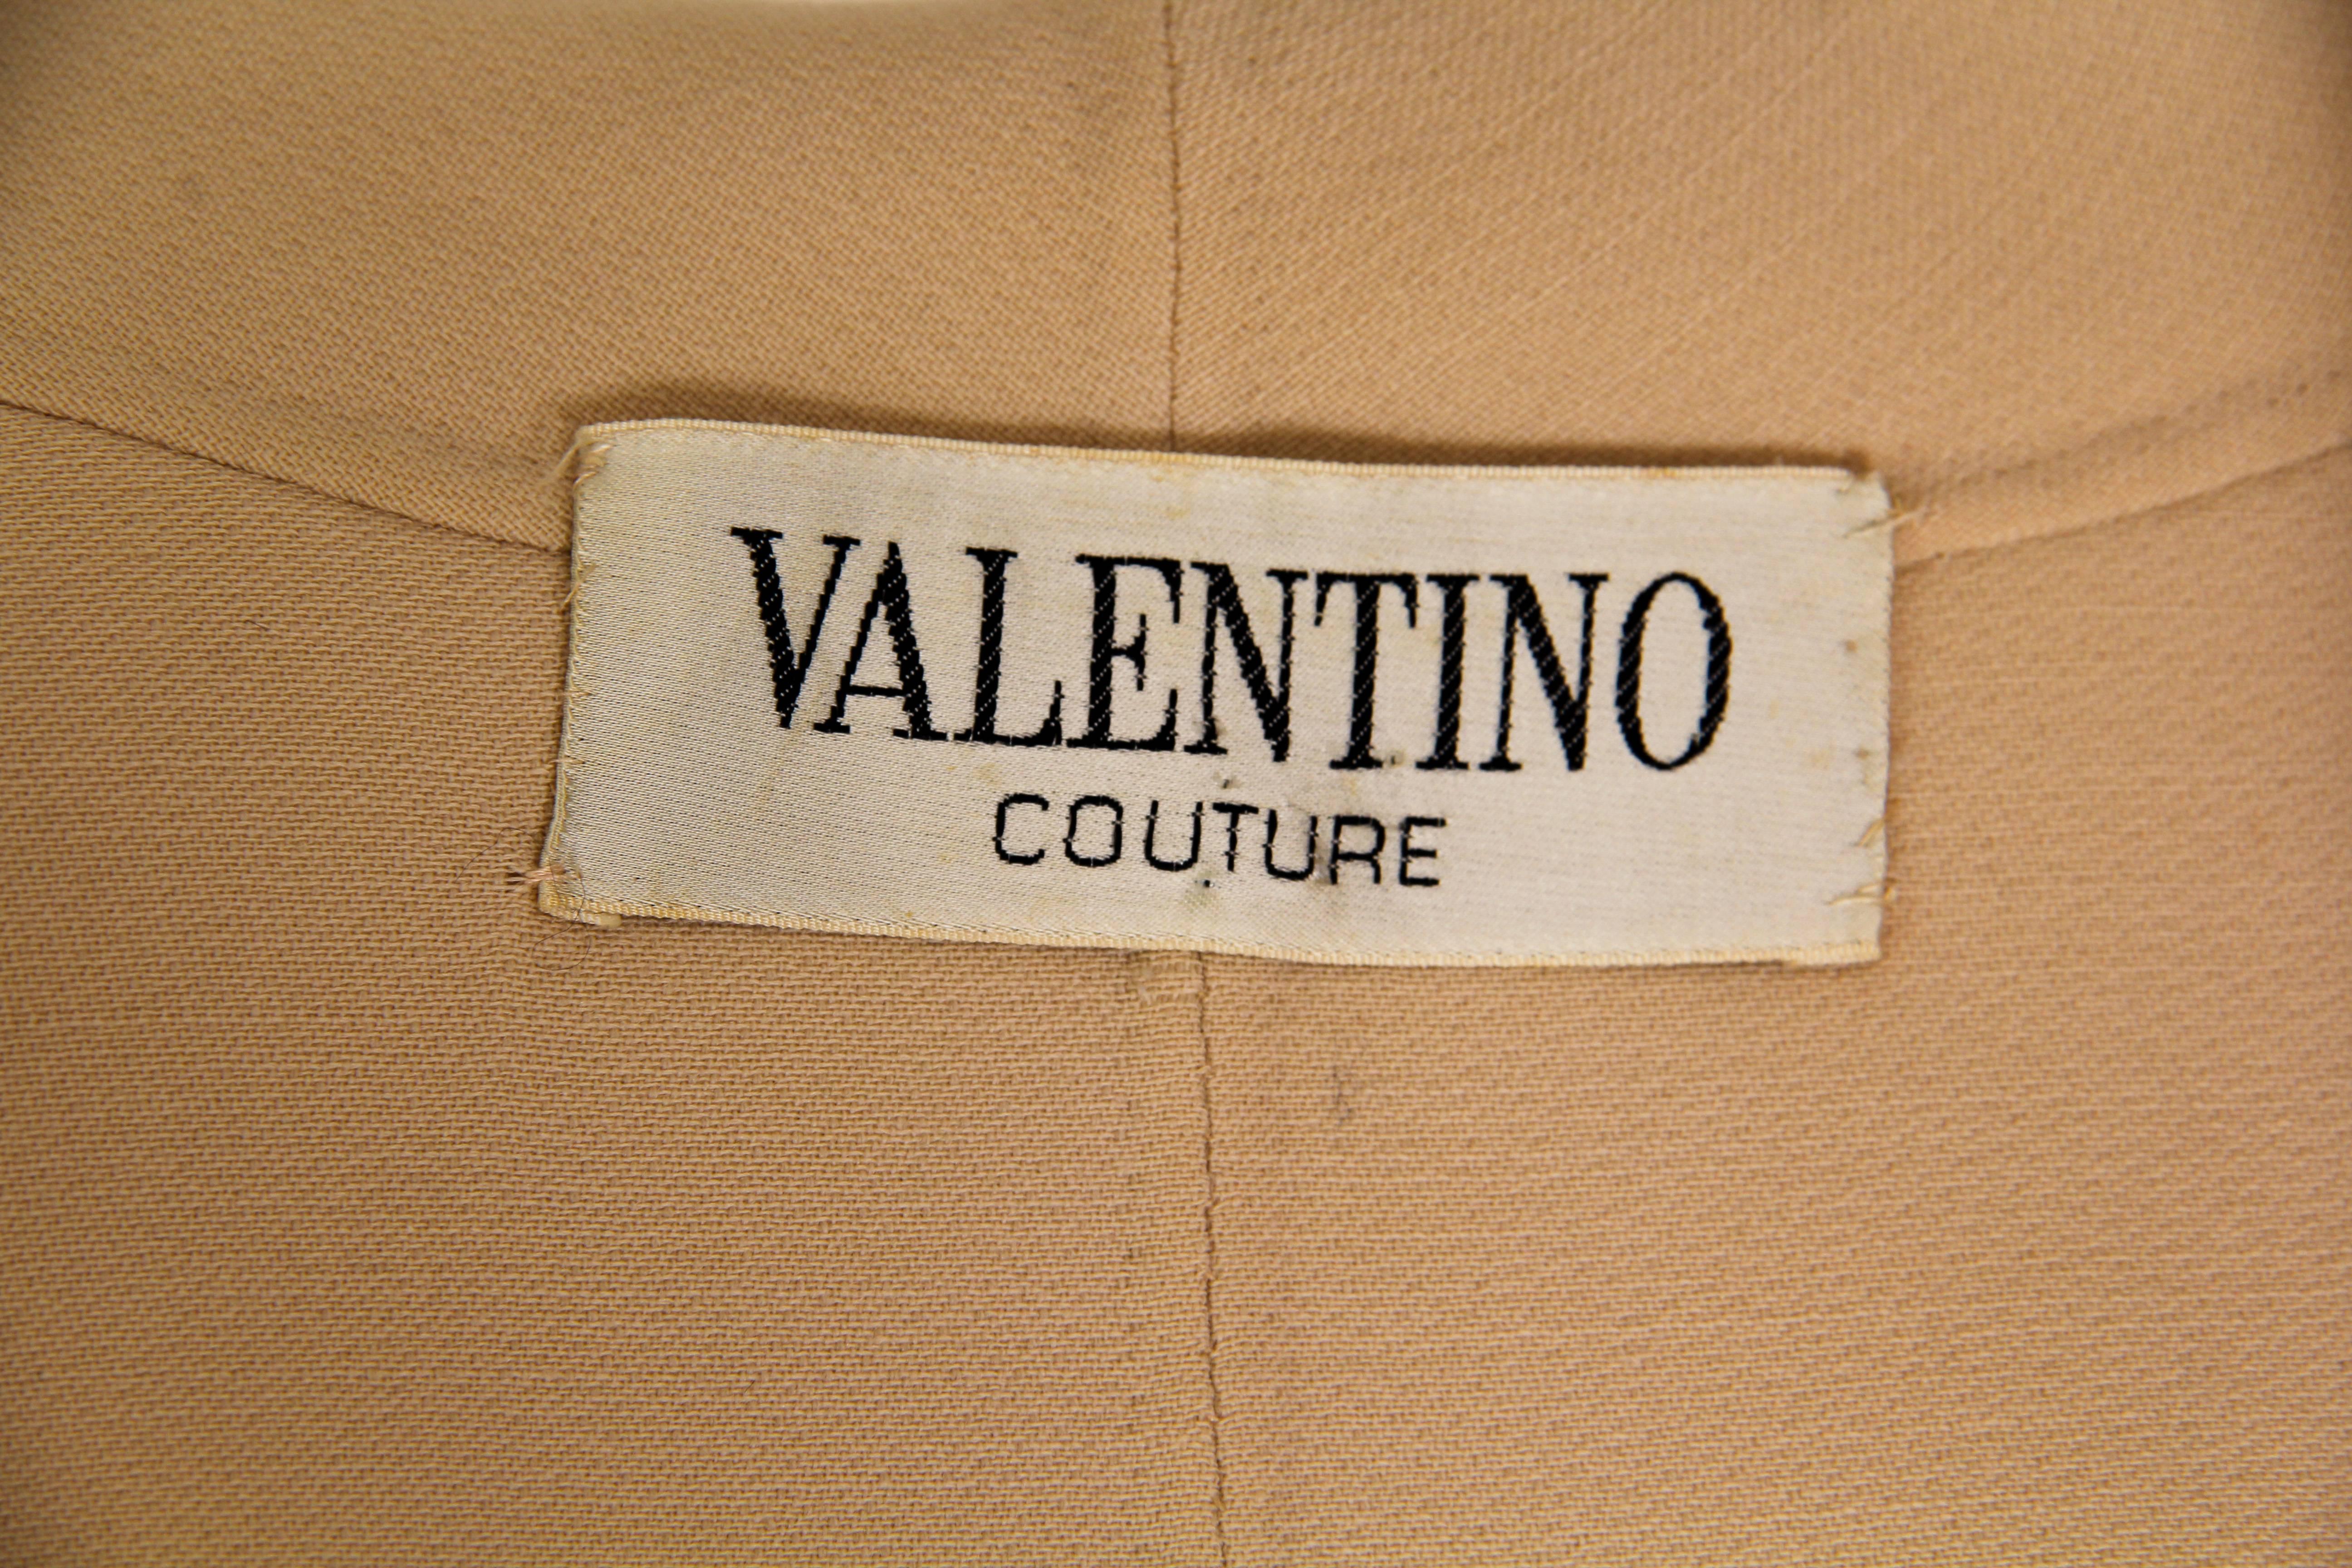 Valentino Couture 1960/70s Lightweight Wool Jacket 5